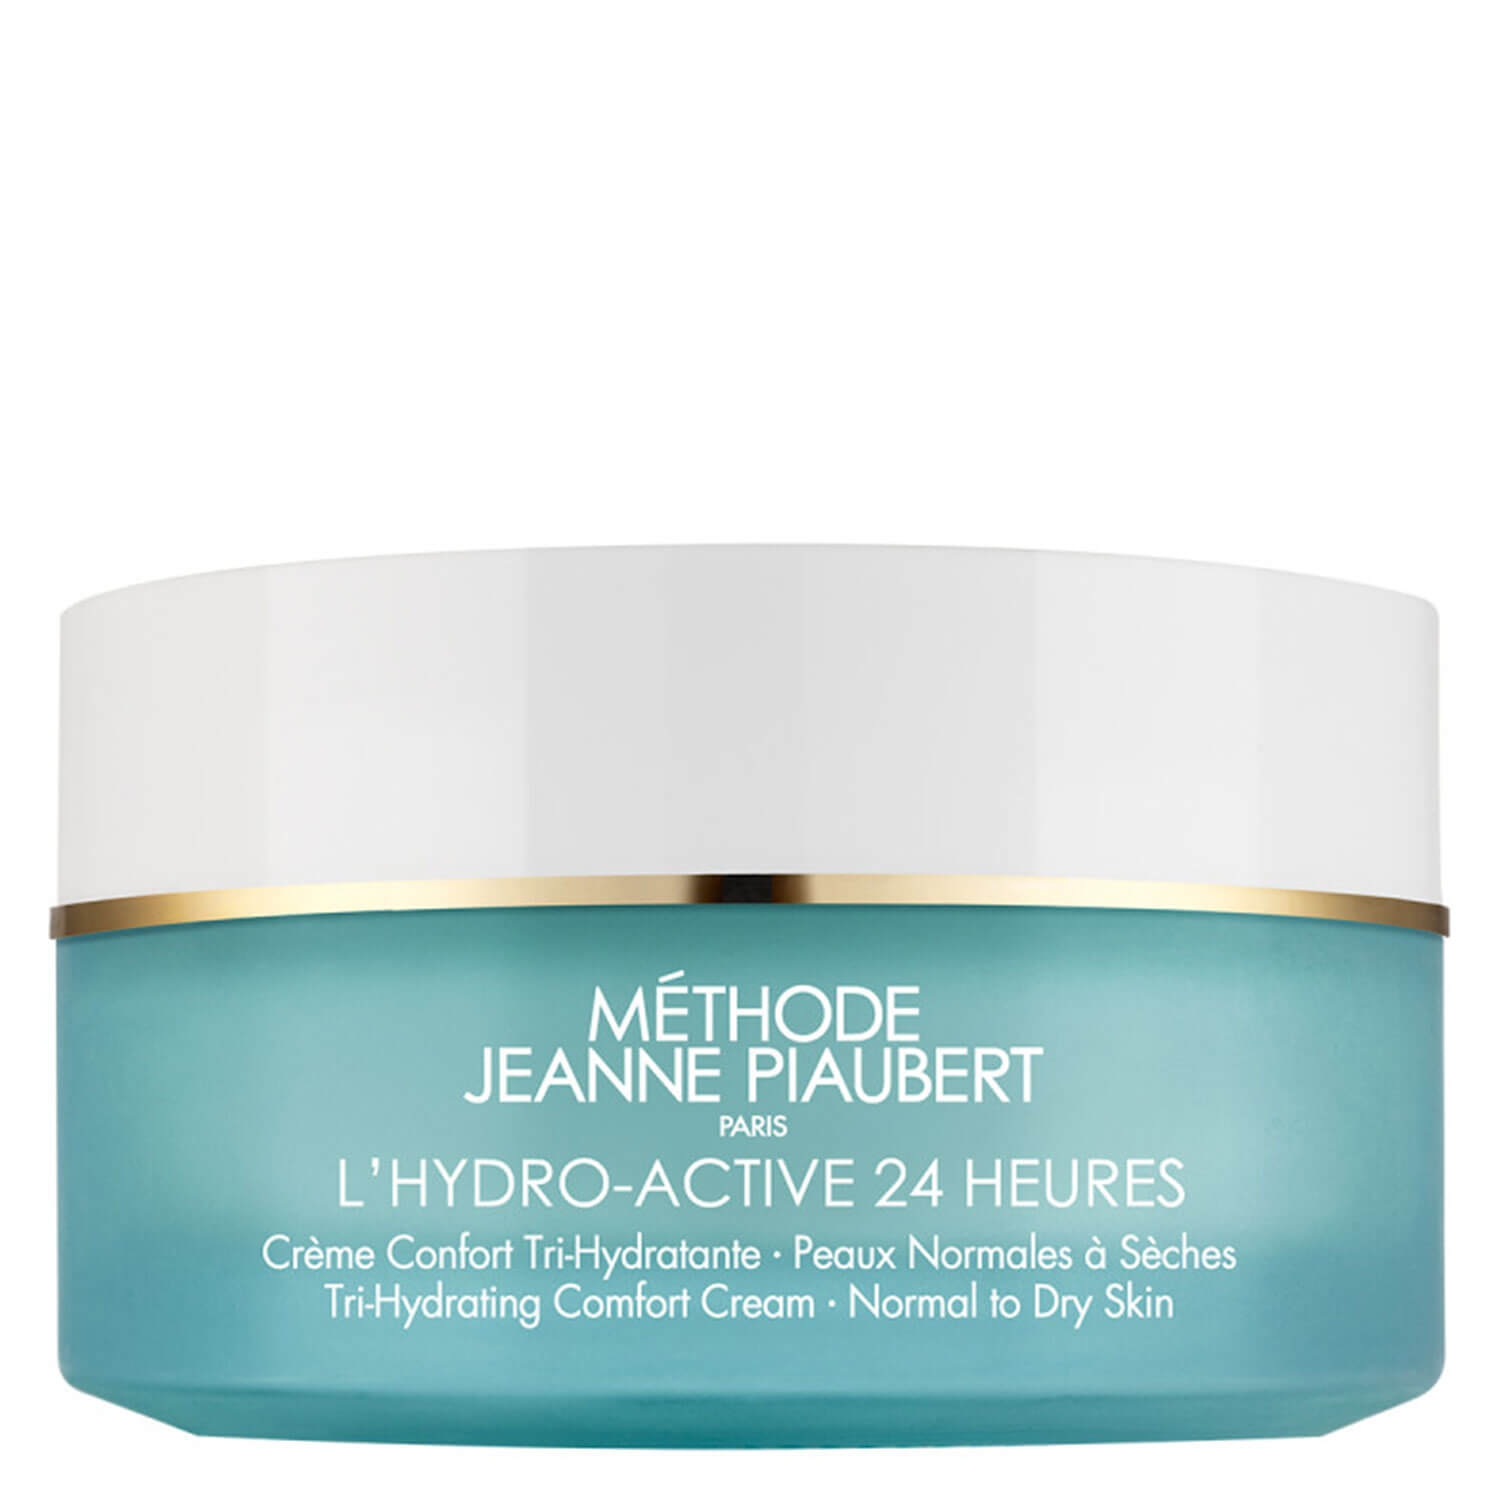 Product image from Jeanne Piaubert - L'Hydro-Active 24 Heures Crème Confort Tri-Hydratante